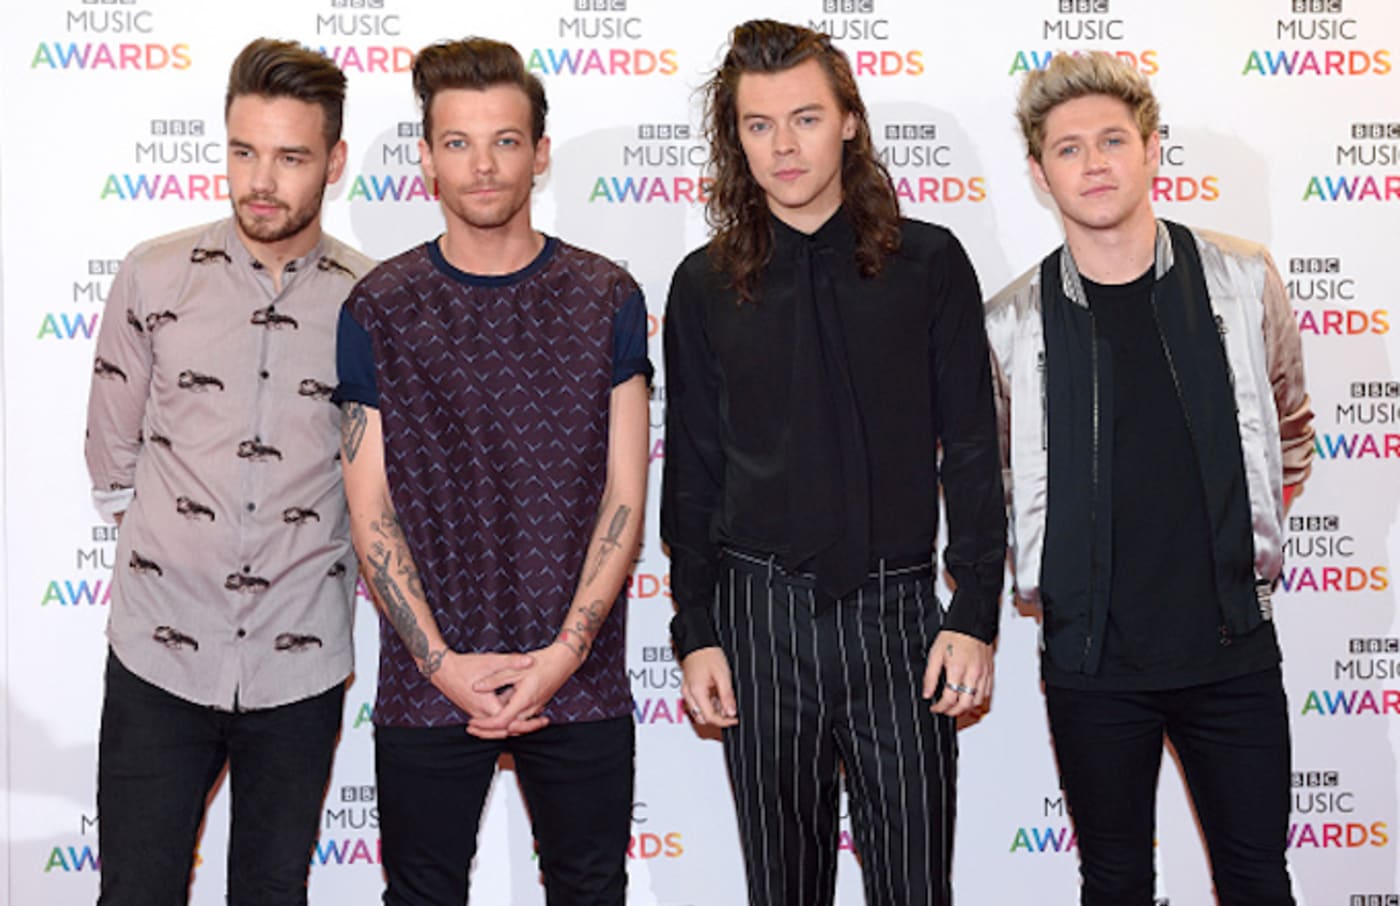 One Direction attend the BBC Music Awards